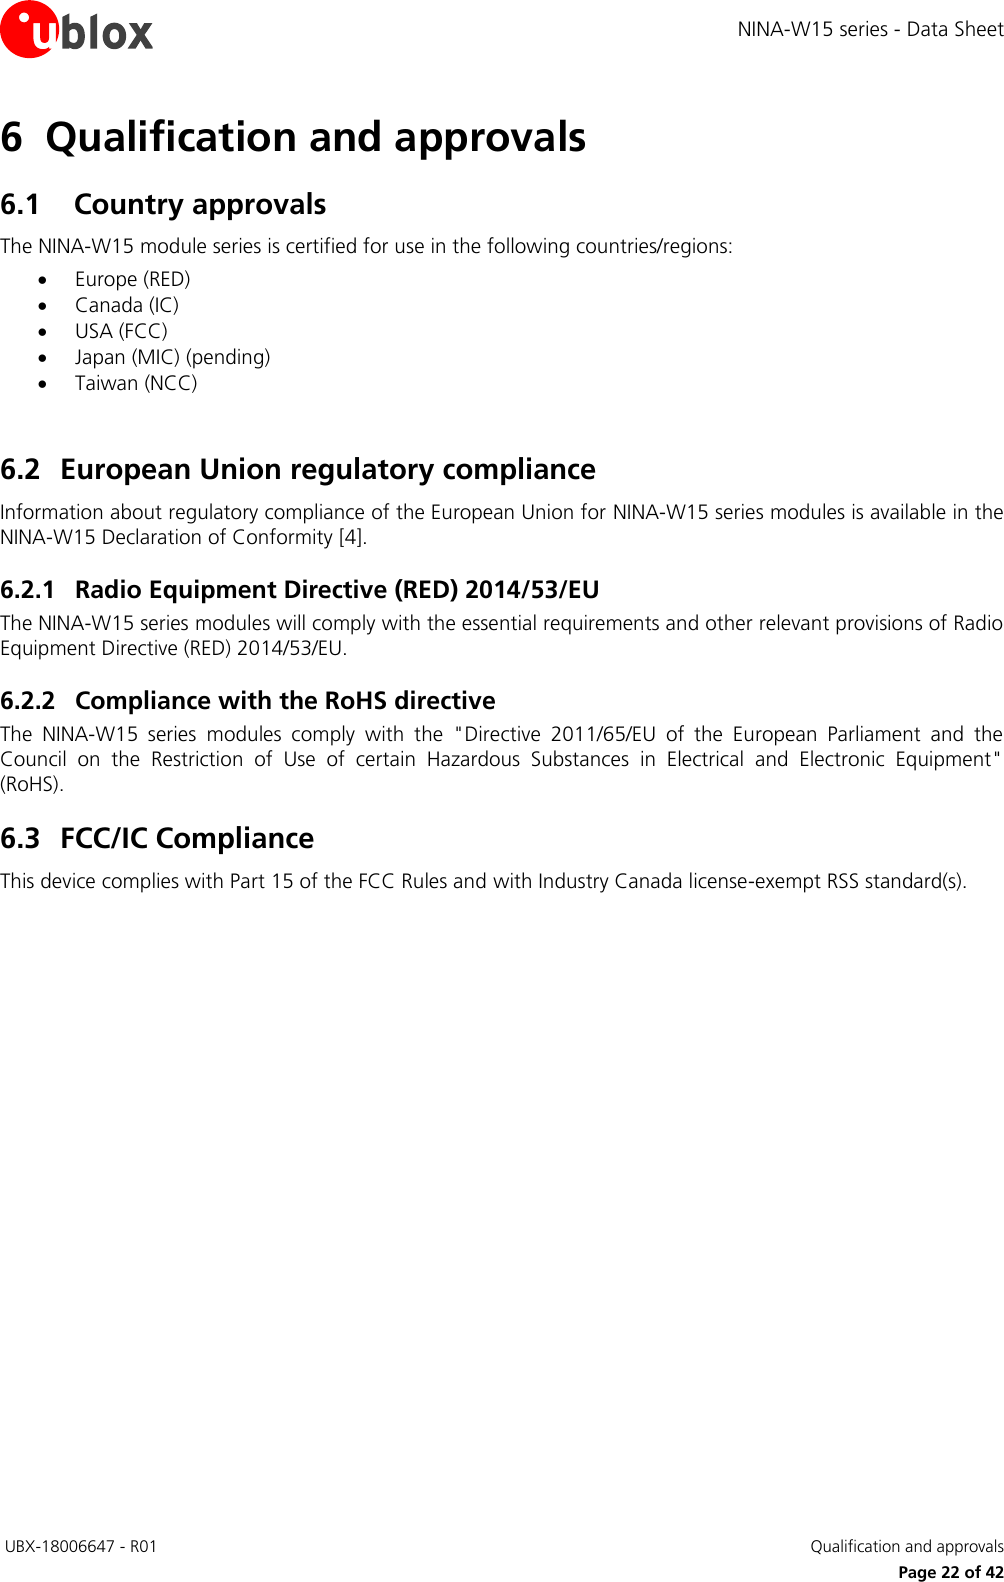 NINA-W15 series - Data Sheet  UBX-18006647 - R01   Qualification and approvals     Page 22 of 42 6 Qualification and approvals 6.1 Country approvals The NINA-W15 module series is certified for use in the following countries/regions:   Europe (RED)  Canada (IC)  USA (FCC)  Japan (MIC) (pending)  Taiwan (NCC)  6.2 European Union regulatory compliance Information about regulatory compliance of the European Union for NINA-W15 series modules is available in the NINA-W15 Declaration of Conformity [4]. 6.2.1 Radio Equipment Directive (RED) 2014/53/EU The NINA-W15 series modules will comply with the essential requirements and other relevant provisions of Radio Equipment Directive (RED) 2014/53/EU.  6.2.2 Compliance with the RoHS directive The  NINA-W15  series  modules  comply  with  the  &quot;Directive  2011/65/EU  of  the  European  Parliament  and  the Council  on  the  Restriction  of  Use  of  certain  Hazardous  Substances  in  Electrical  and  Electronic  Equipment&quot; (RoHS). 6.3 FCC/IC Compliance This device complies with Part 15 of the FCC Rules and with Industry Canada license-exempt RSS standard(s).     